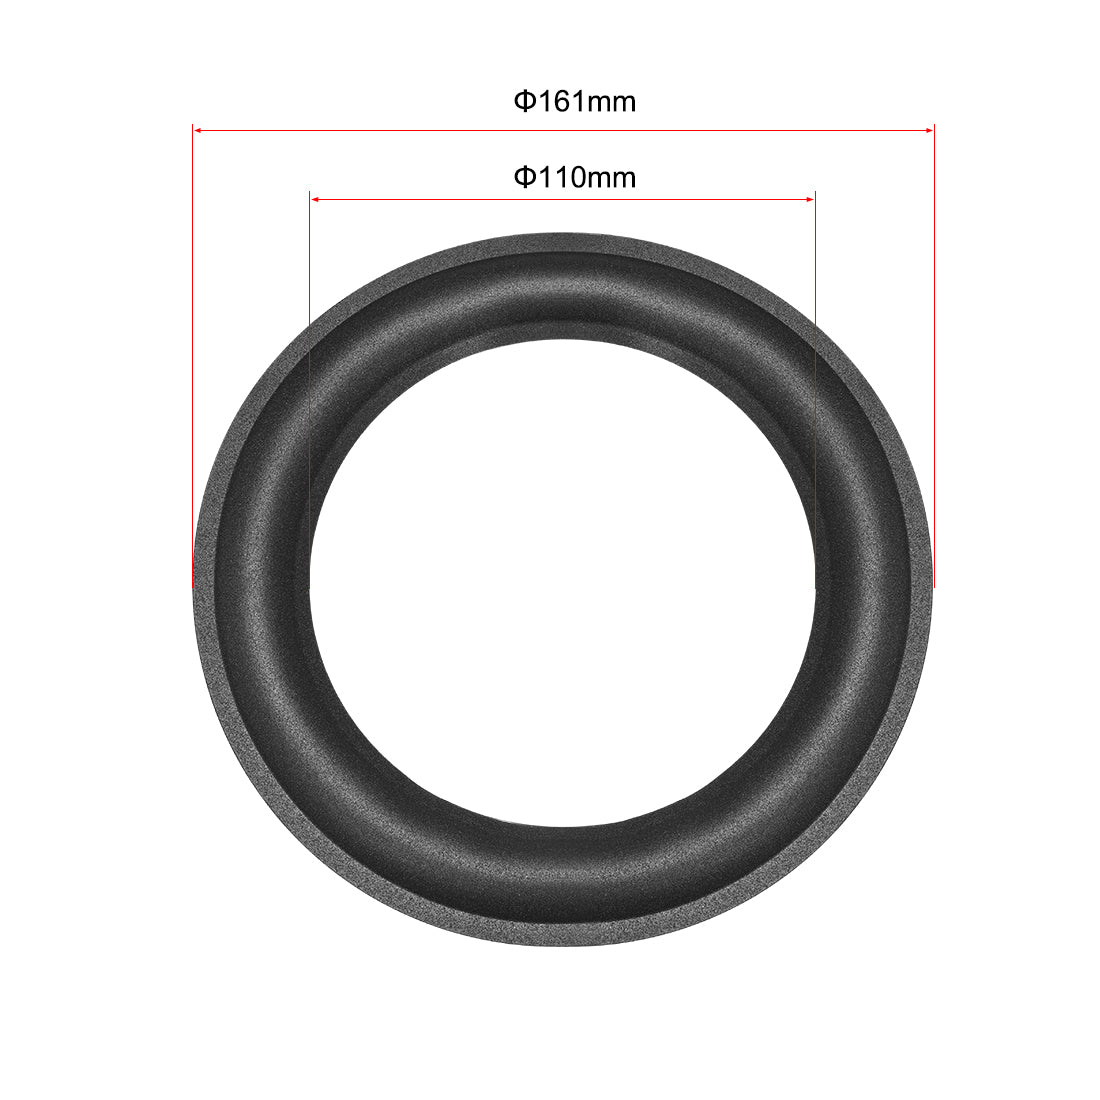 uxcell Uxcell 6.5" 6.5 inches Speaker Foam Edge Surround Rings Replacement Parts for Speaker Repair or DIY